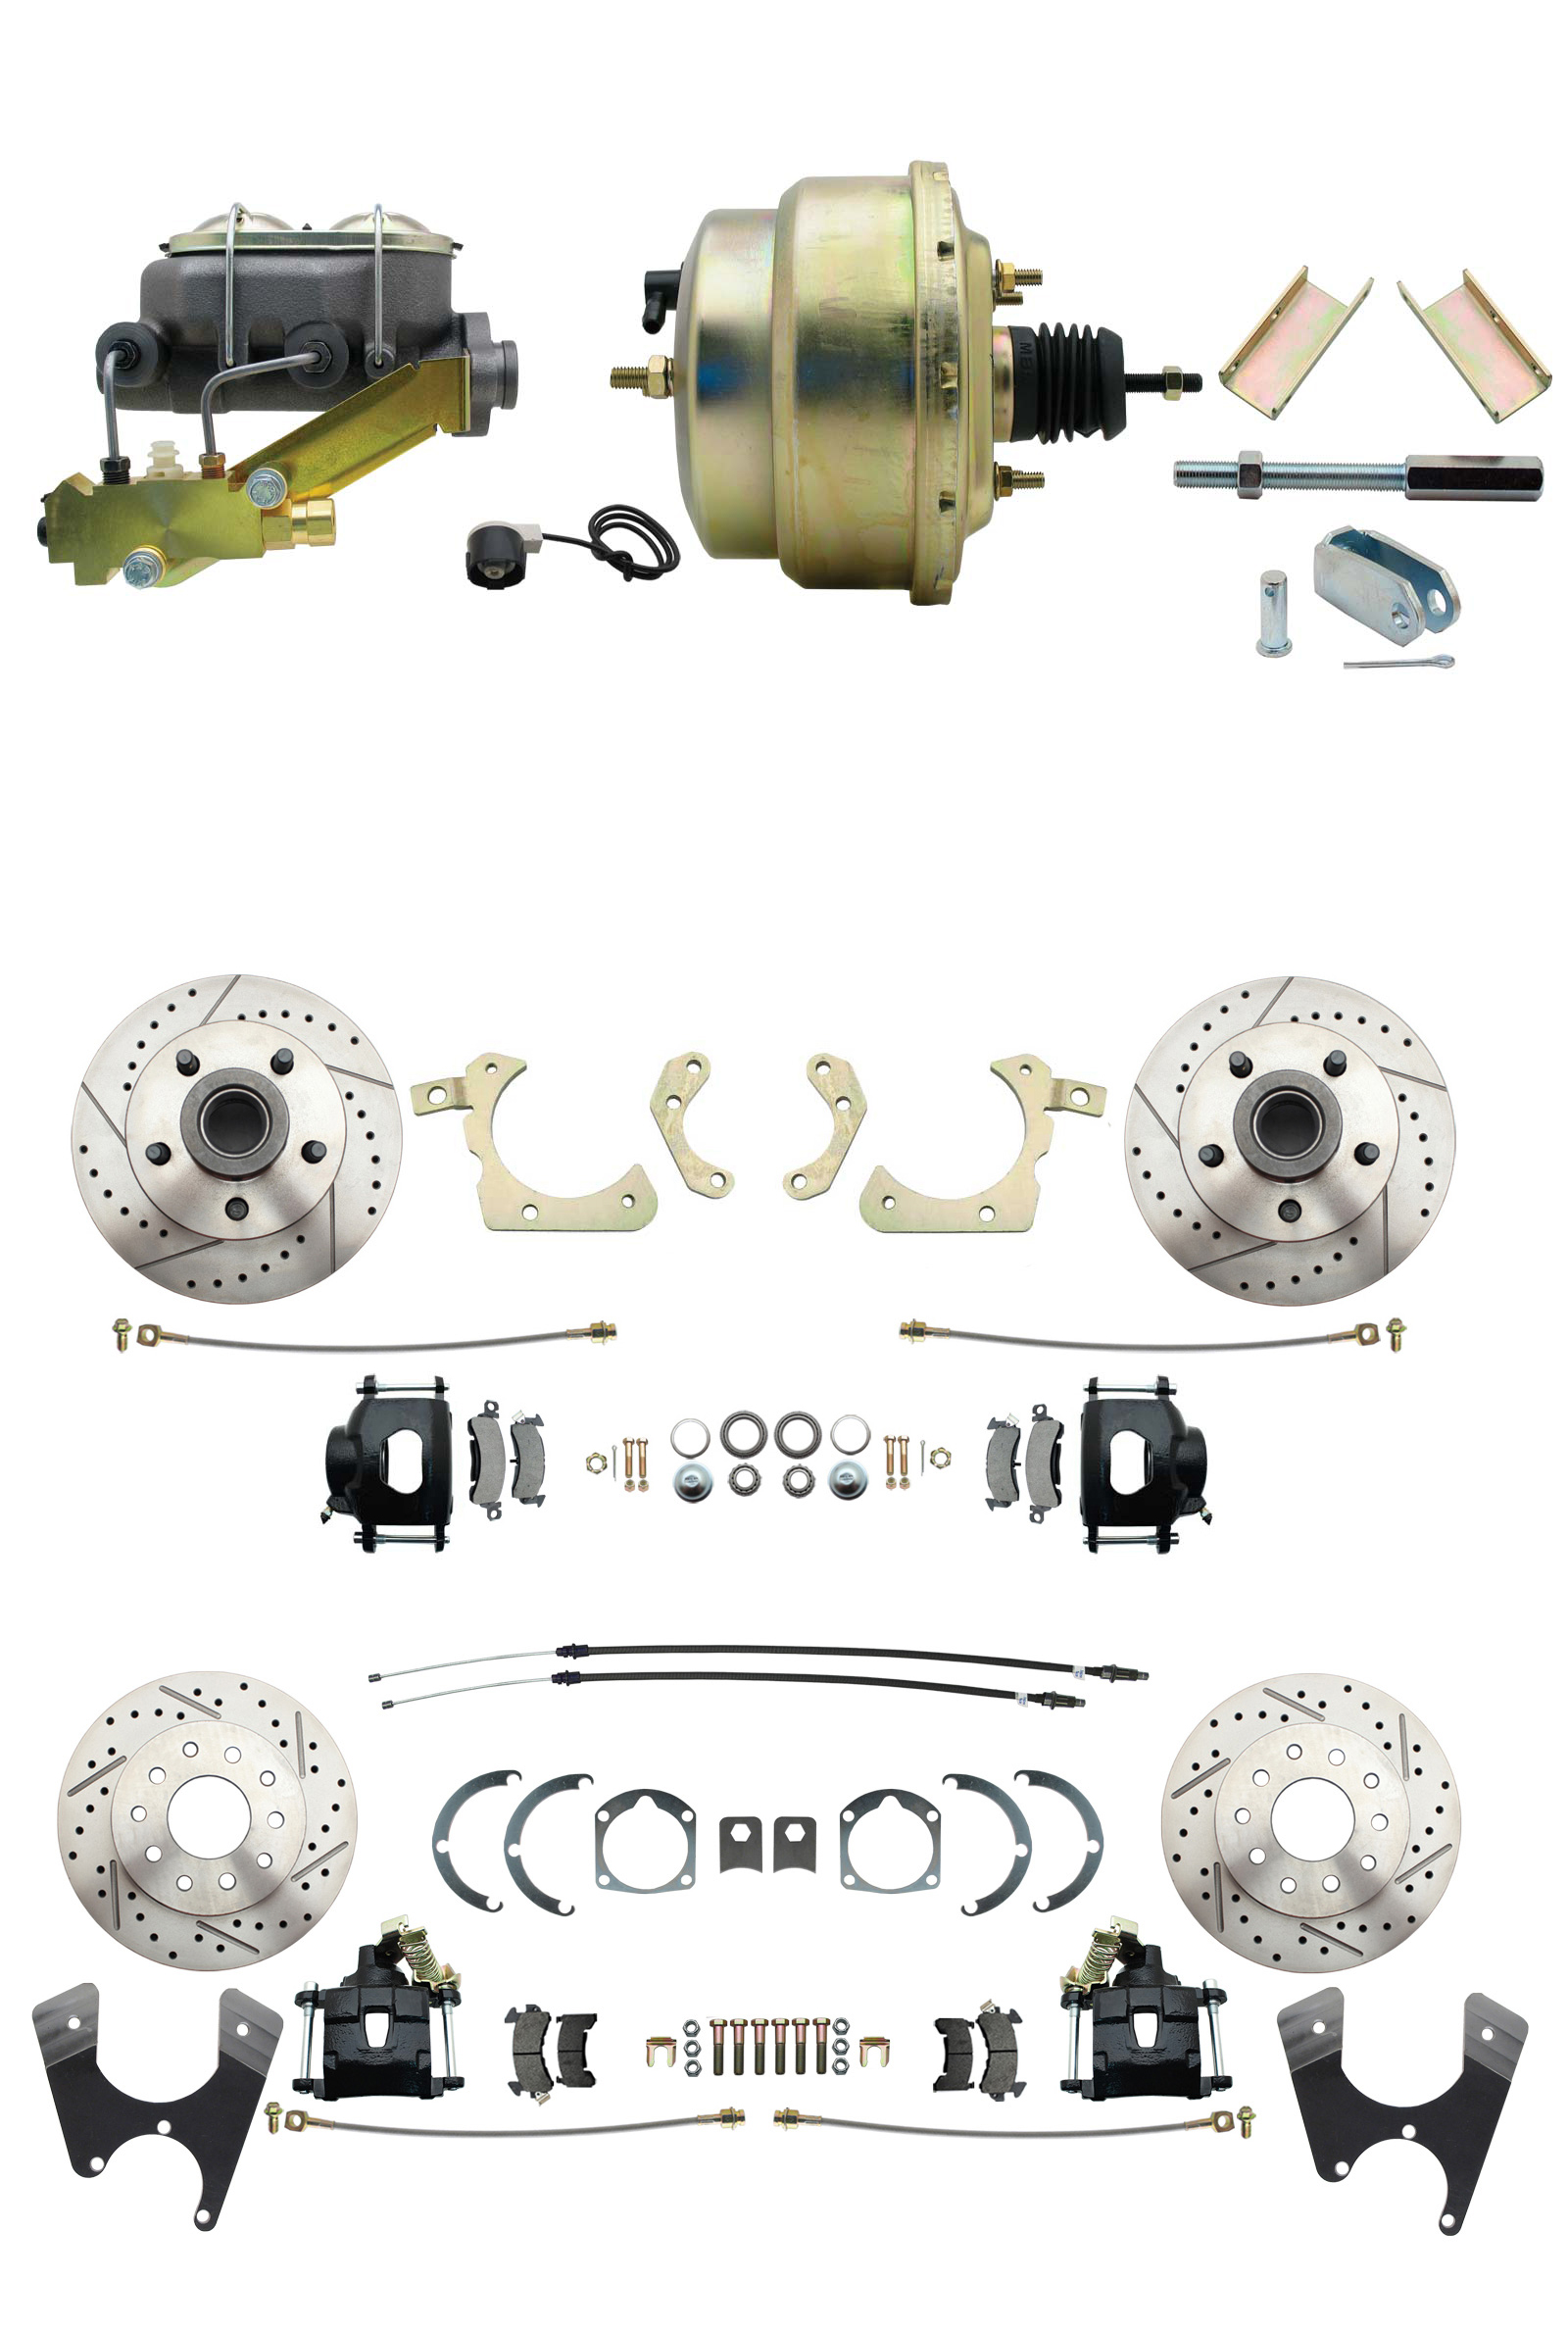 1955-1958 GM Full Size Front & Rear Power Disc Brake Kit Black Powder Coated Calipers Drilled/Slotted Rotors (Impala, Bel Air, Biscayne) & 8 Dual Zinc Booster Conversion Kit W/ Cast Iron Master Cylinder Left Mount Disc/